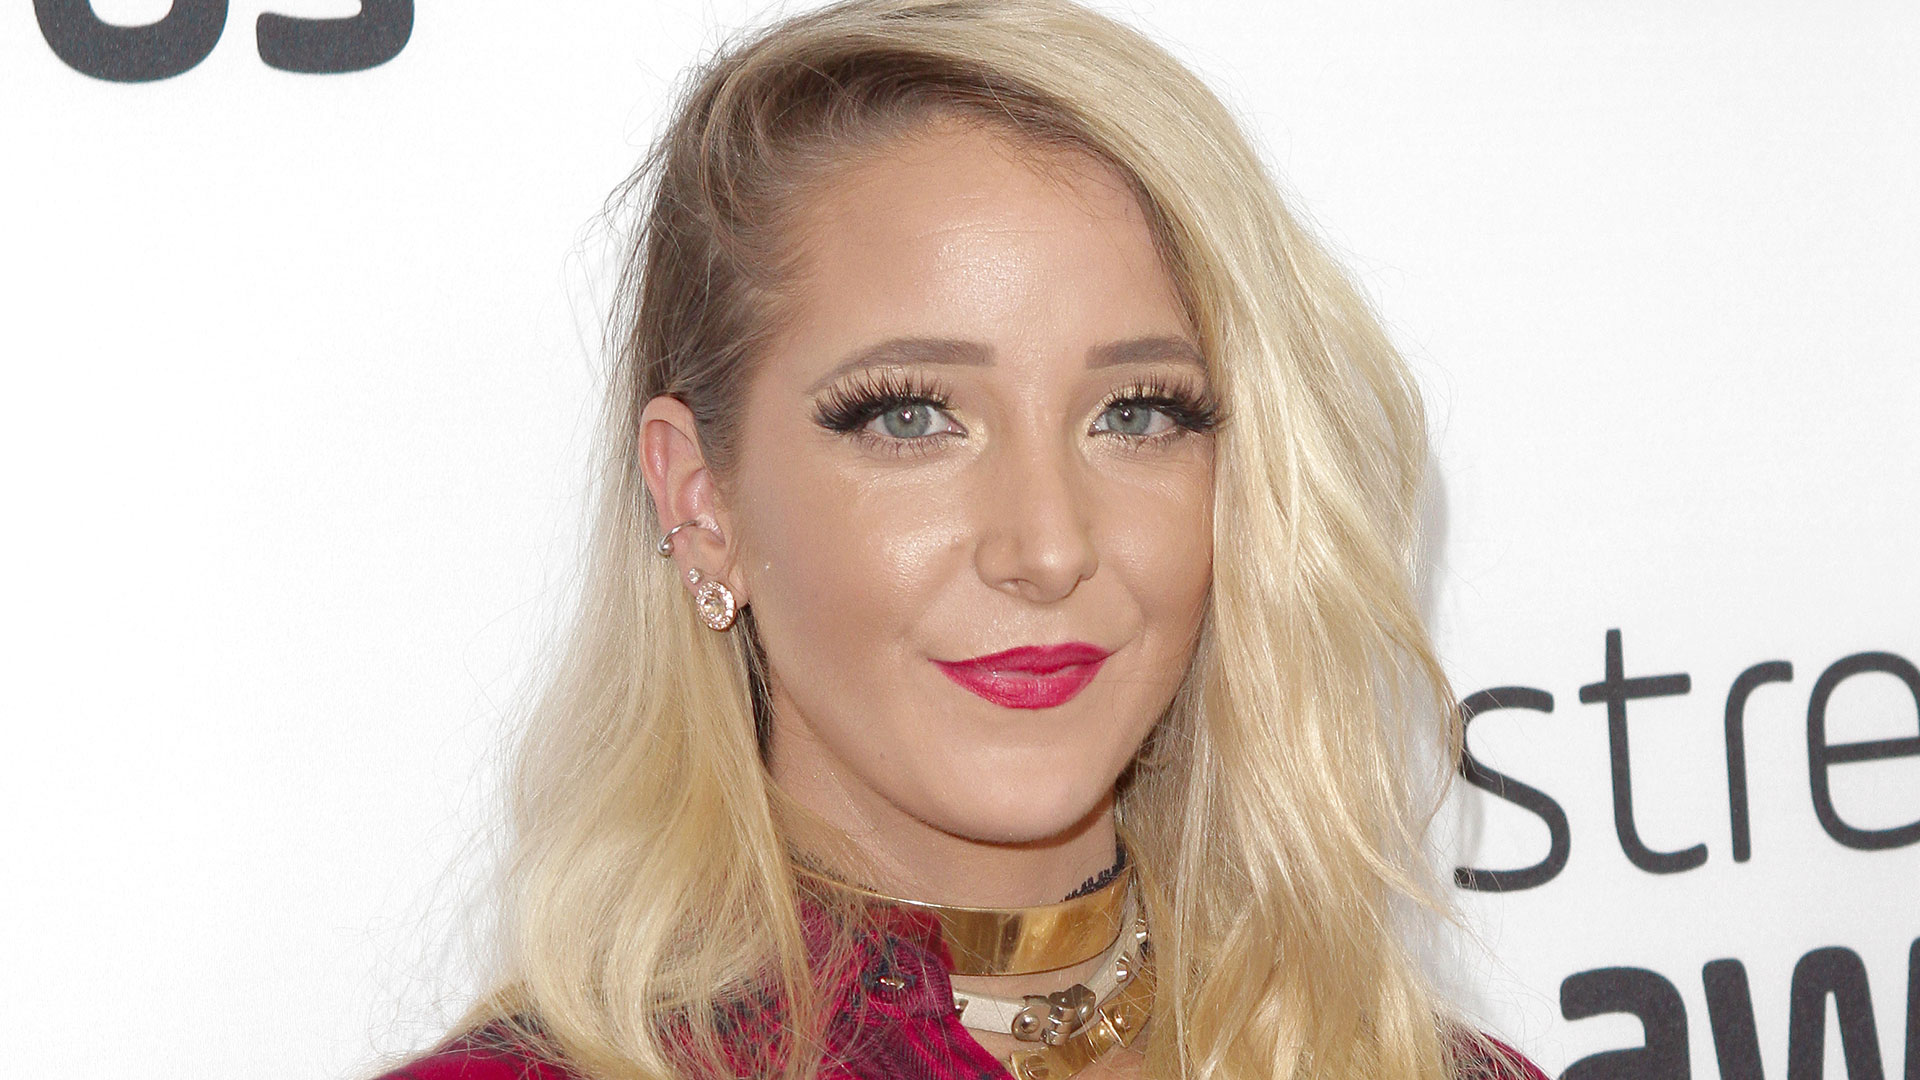 Jenna Marbles Quits YouTube 'For Now' In Tearful Apology Video 'I Just